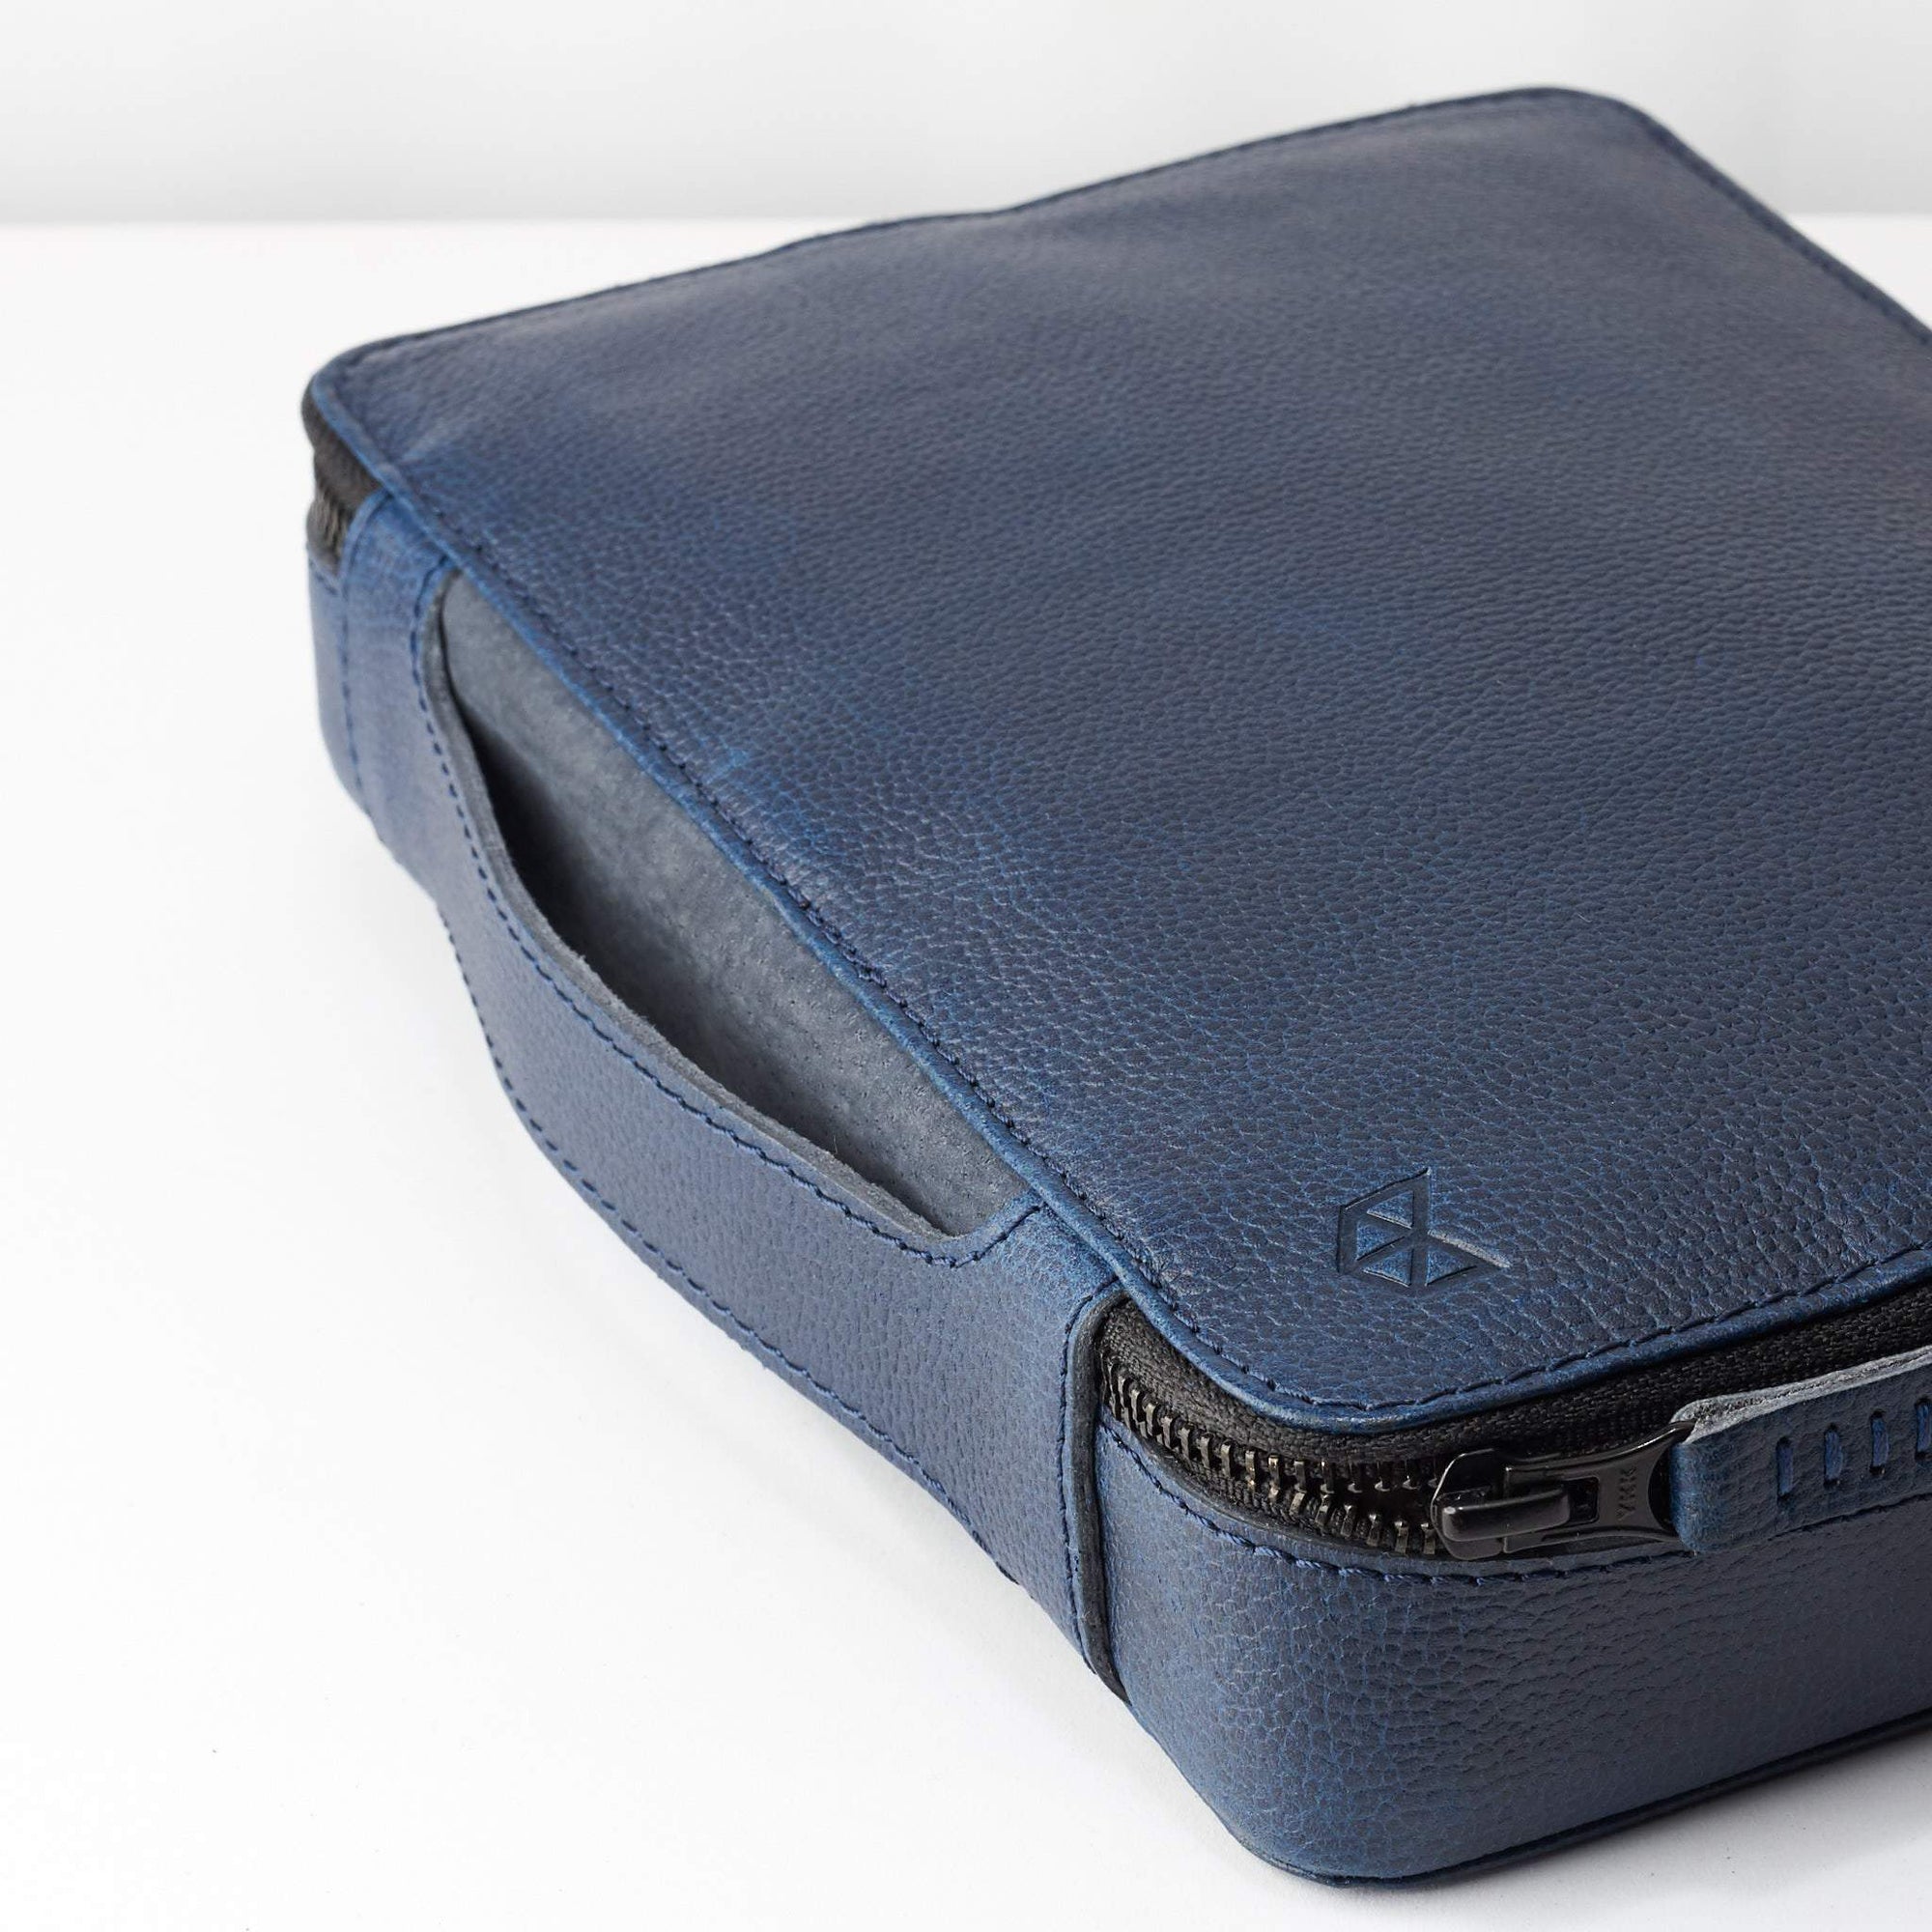 Best tech organizer bag for travel. Navy blue gadget pouch by Capra Leather